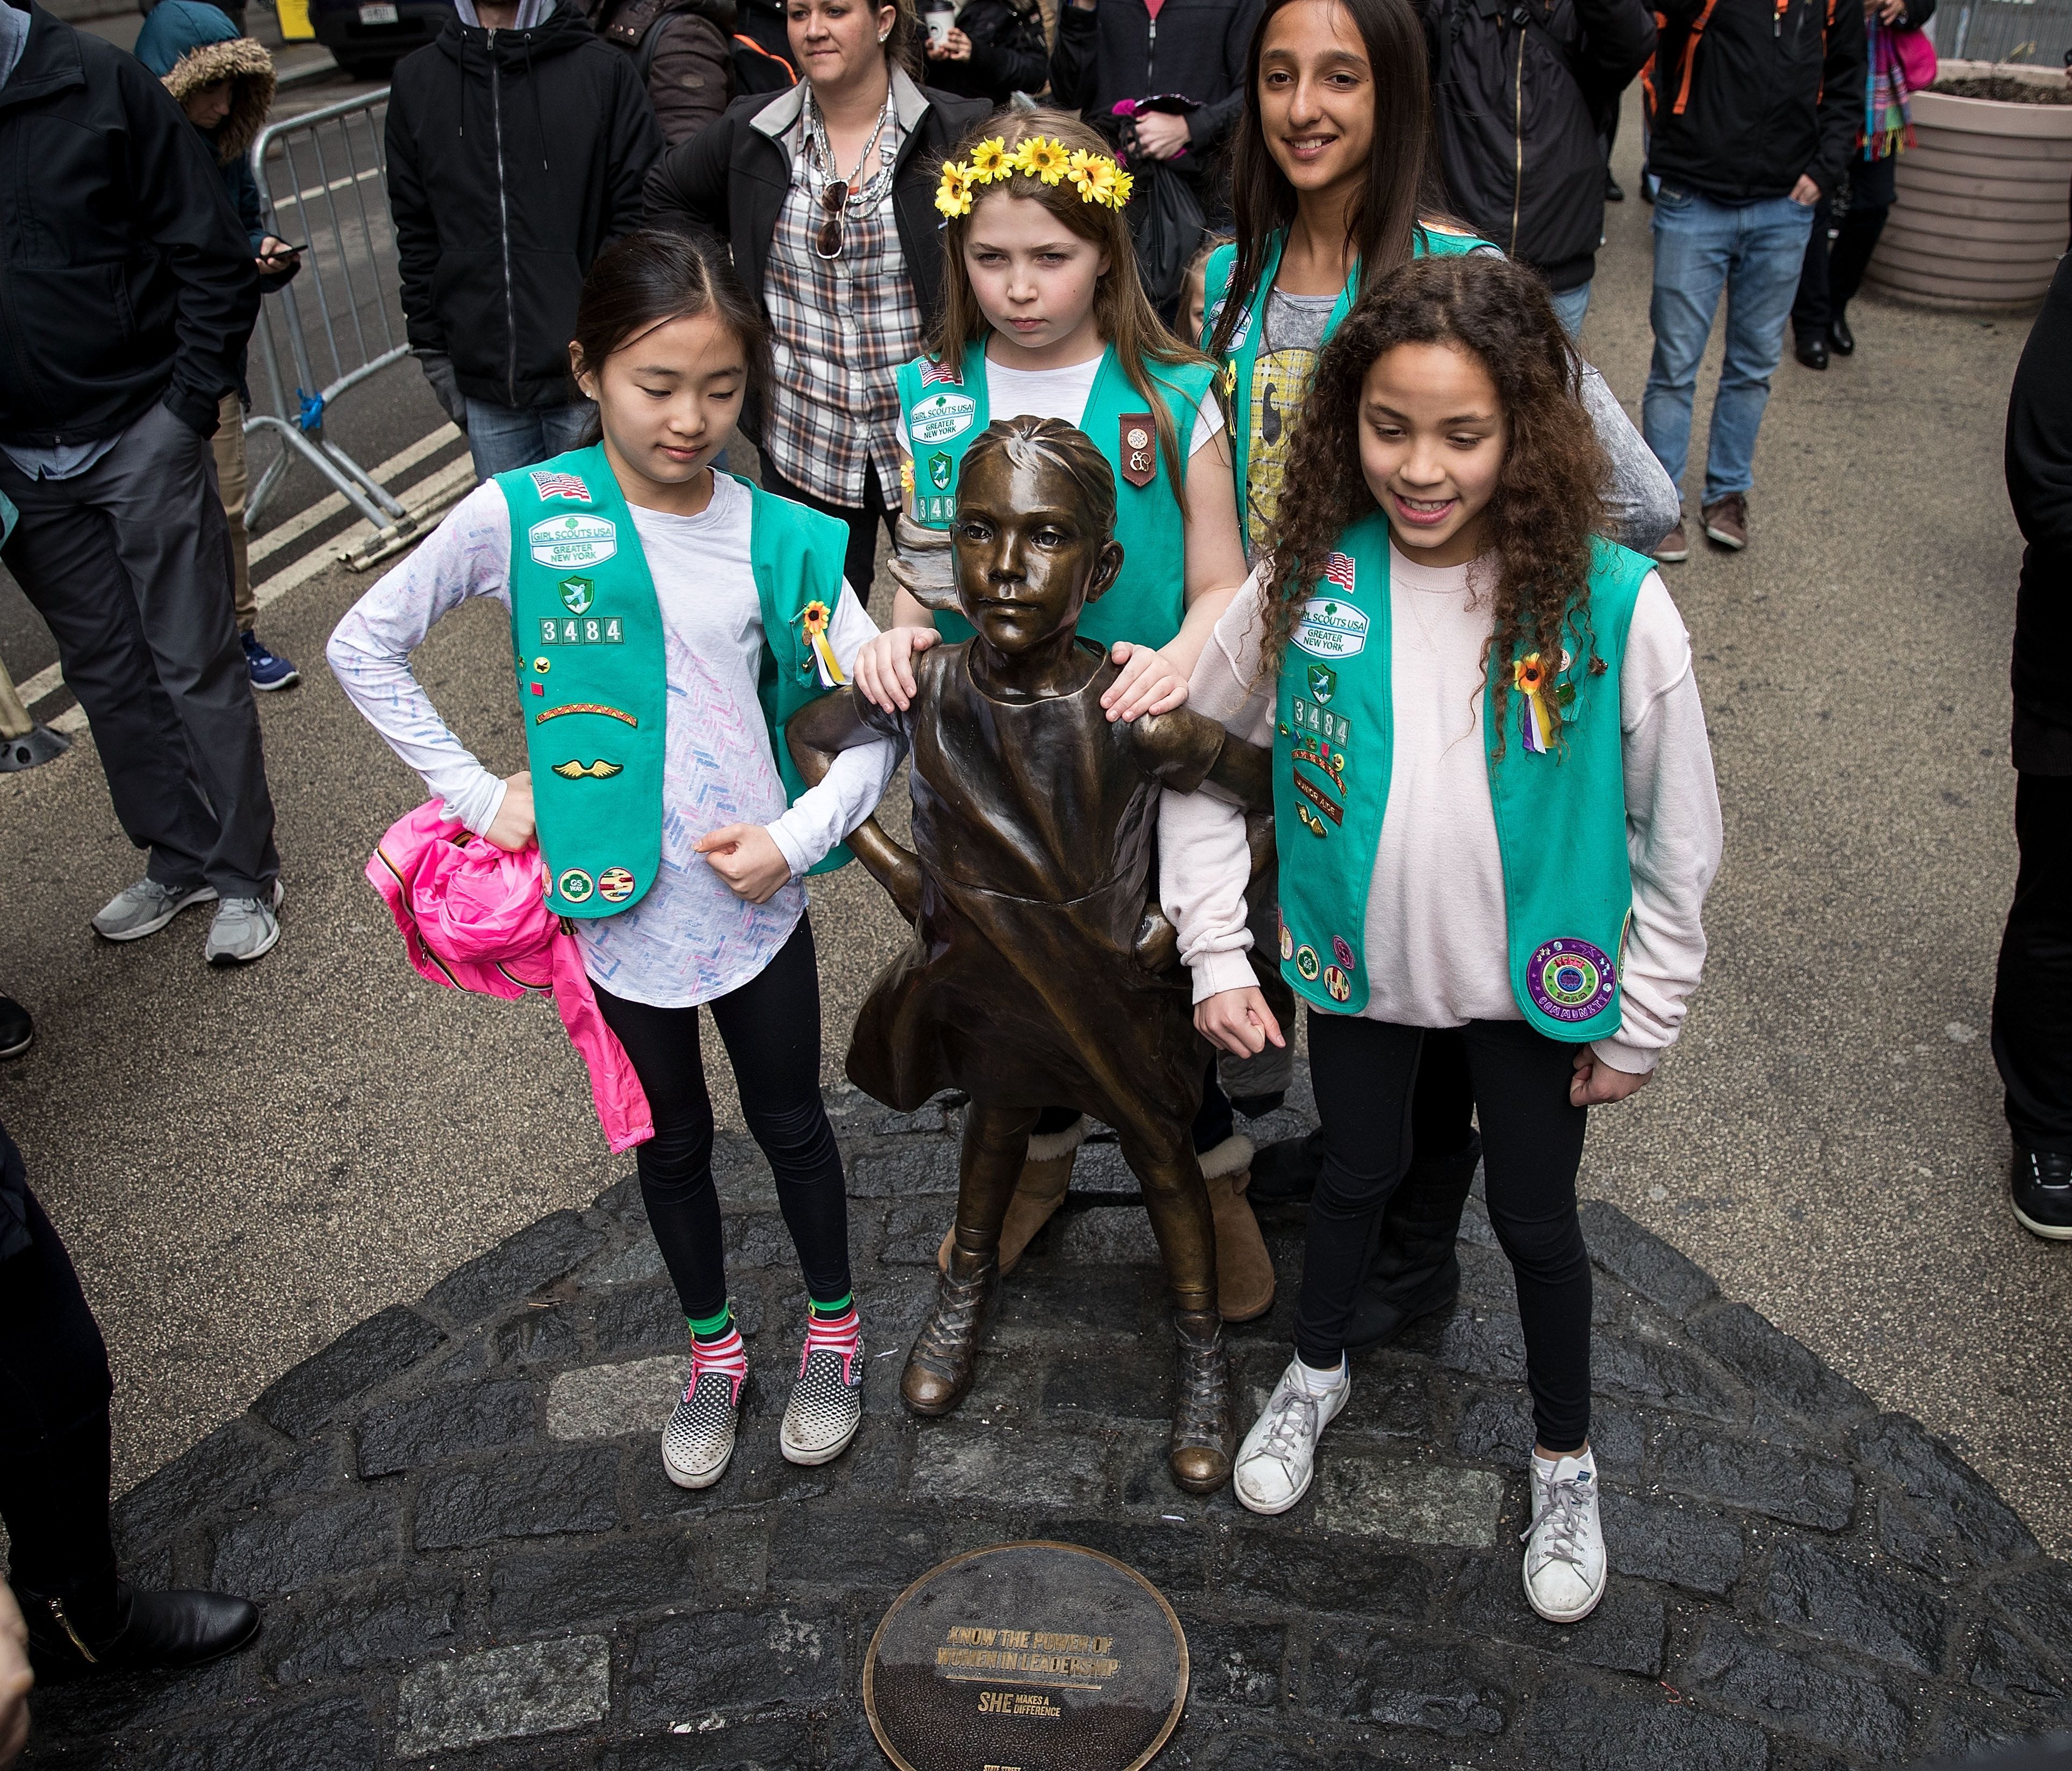 Members of Girl Scout Troop 3484 pose for photos with the 